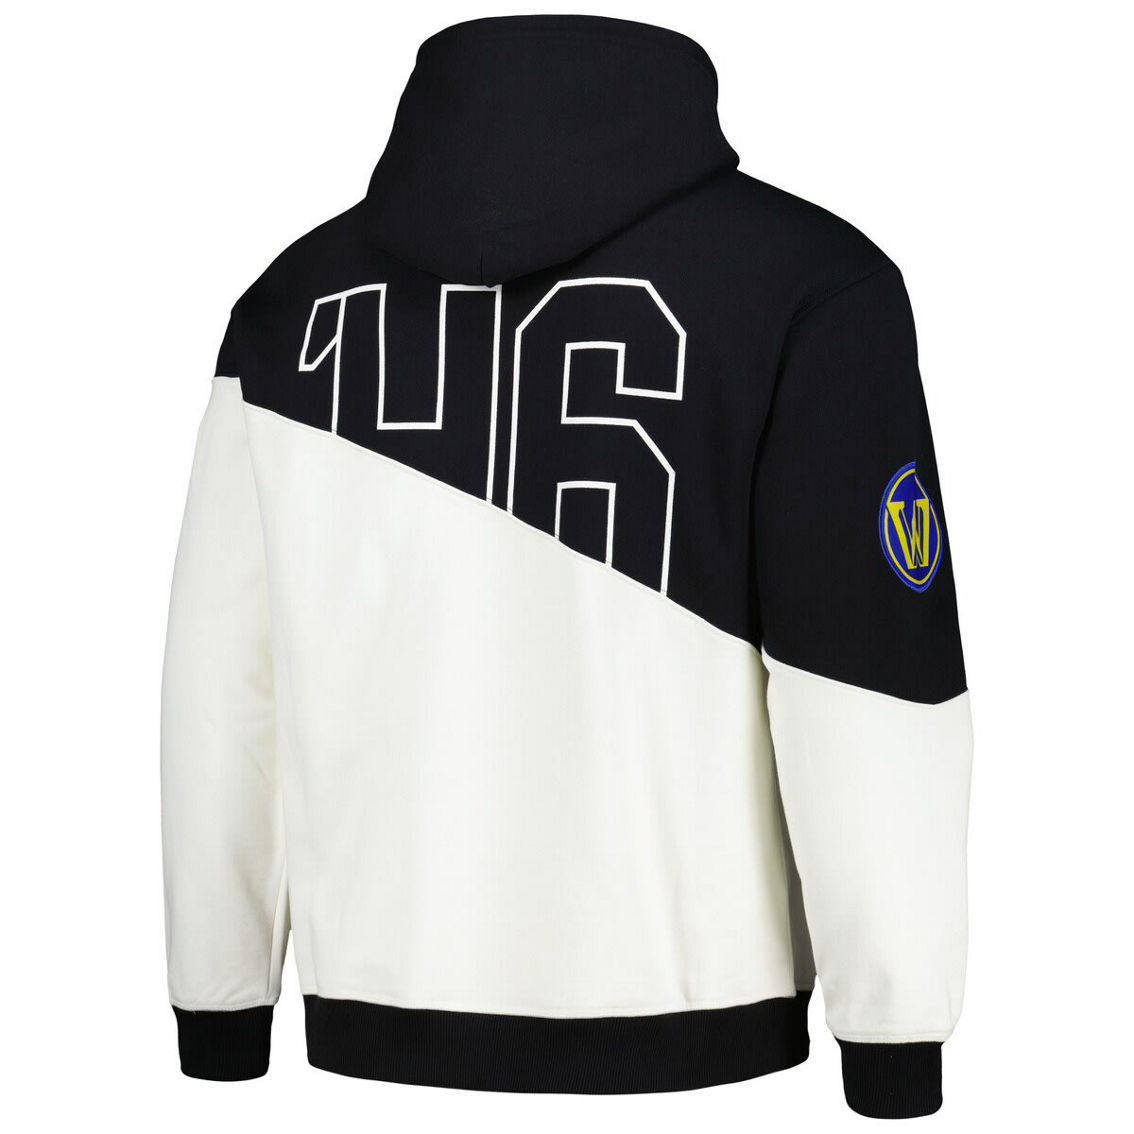 The Wild Collective Unisex Black Golden State Warriors Split Pullover Hoodie - Image 4 of 4